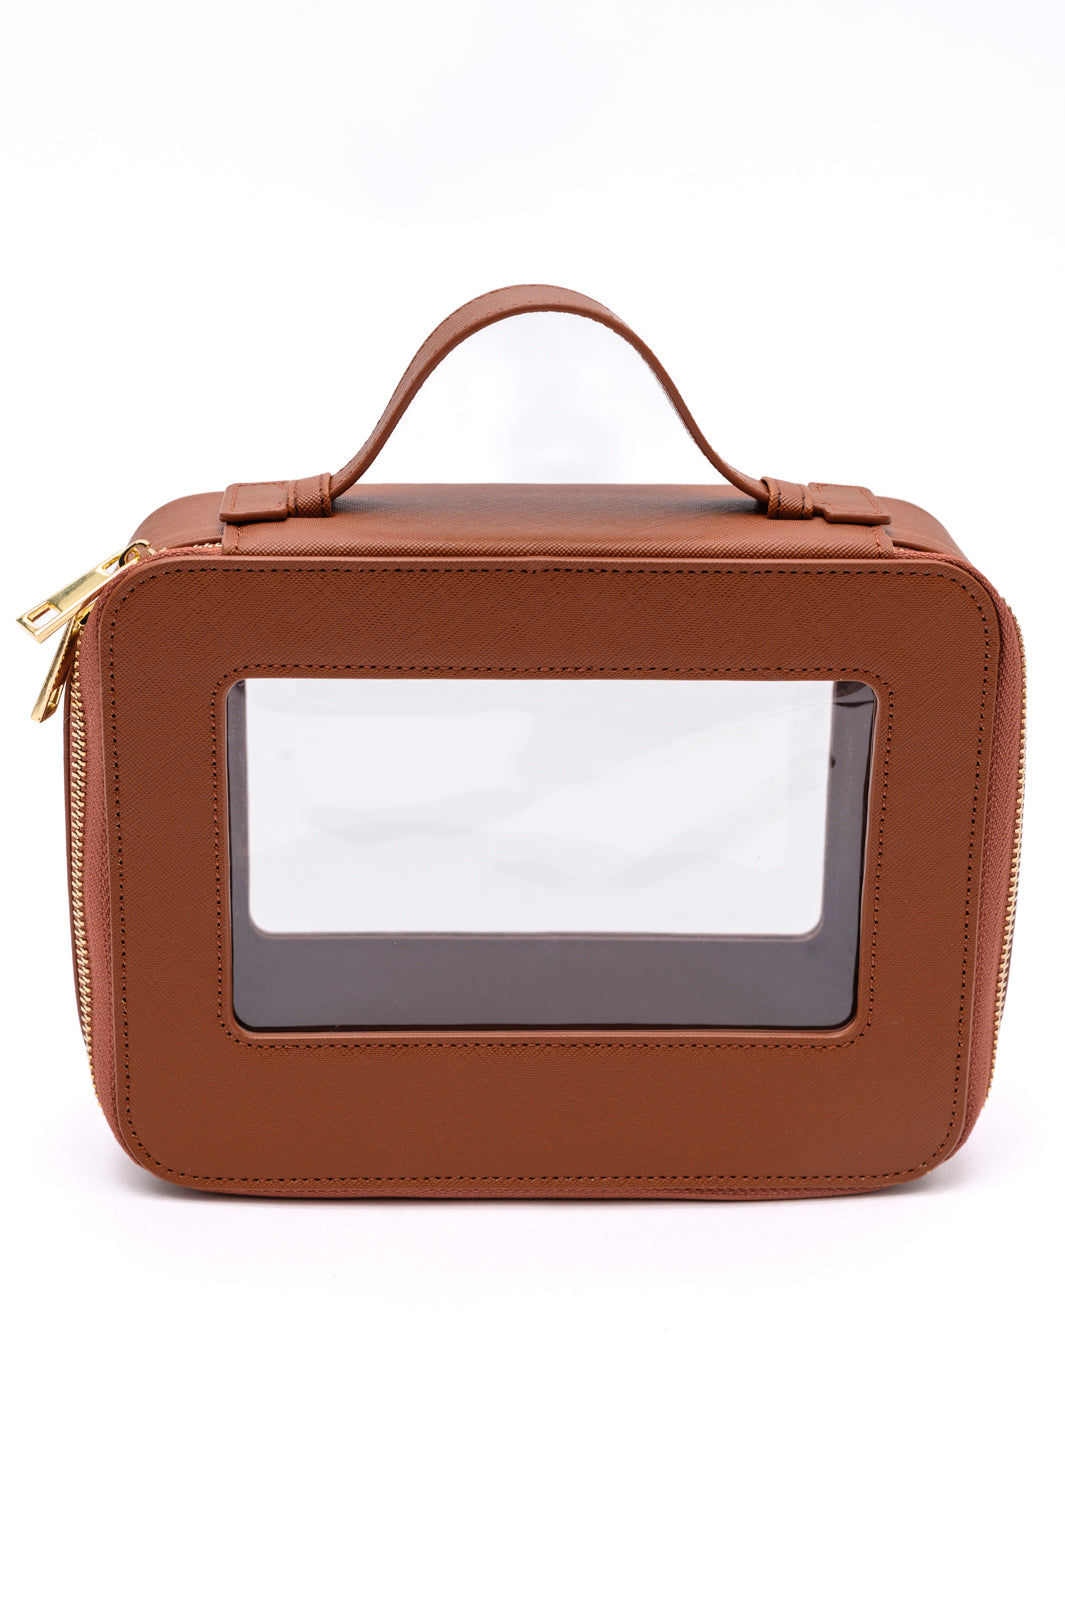 PU Leather Travel Cosmetic Case in Camel - 2/23